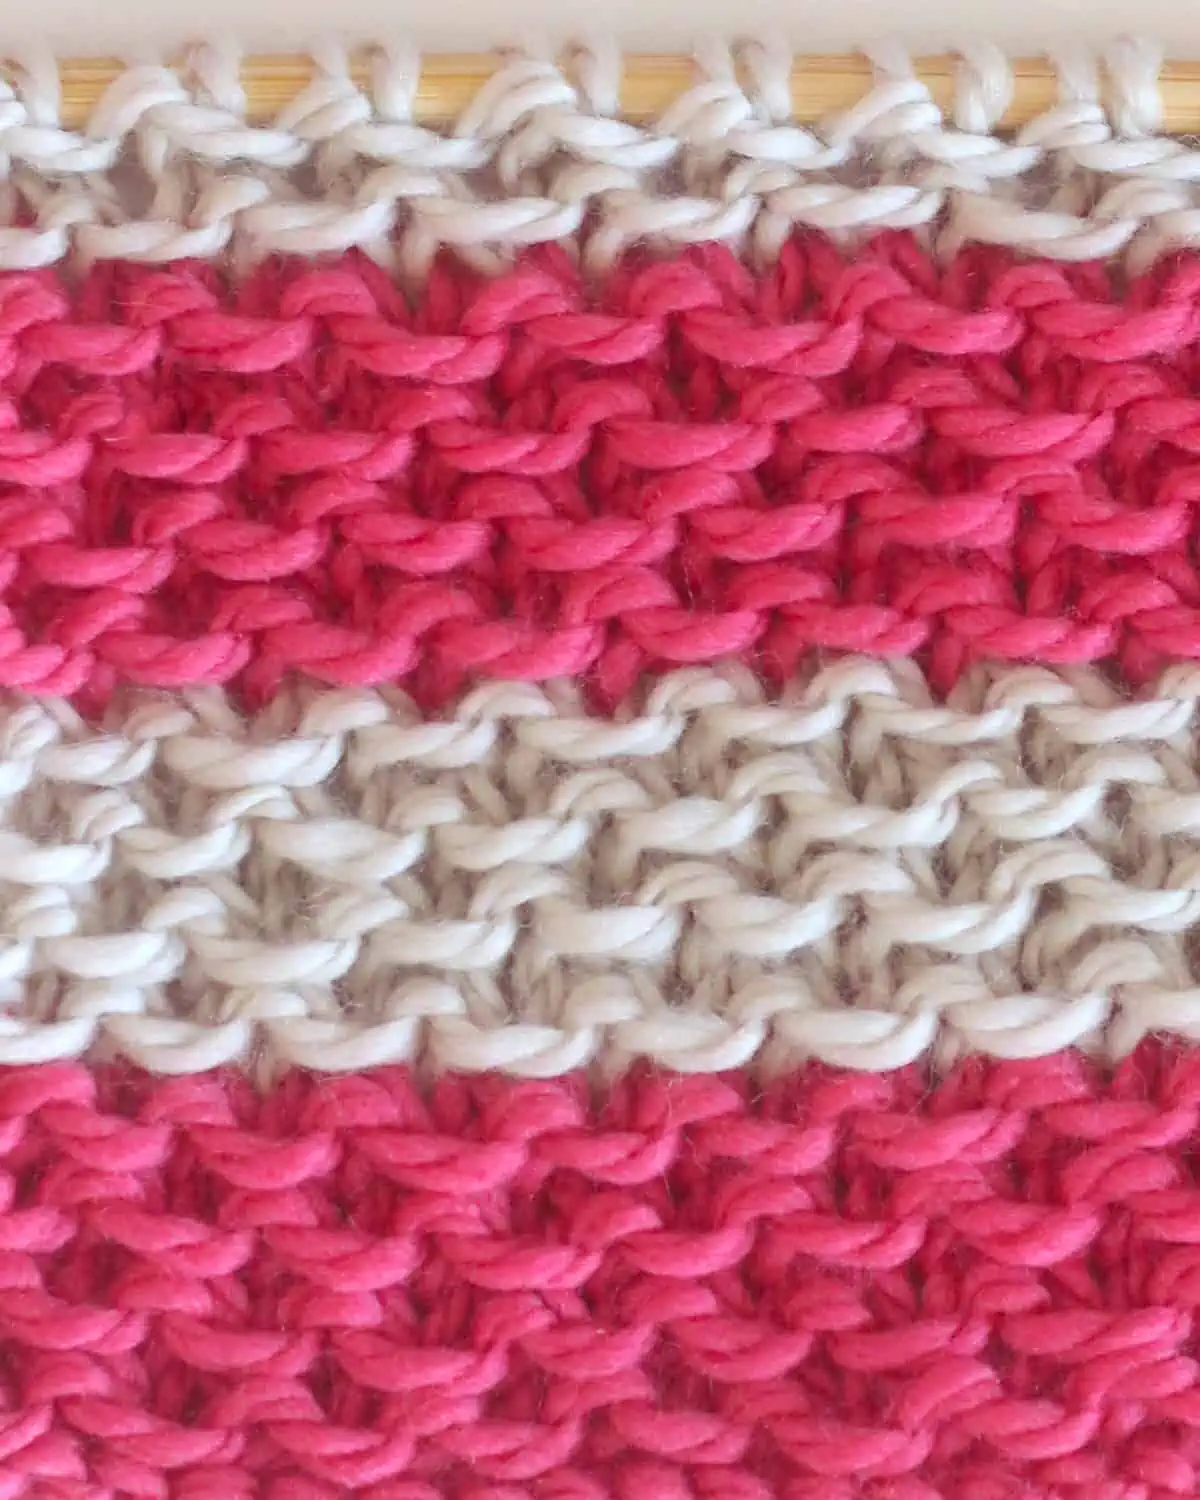 Color changes of the Stamen Knit Stitch in pink and beige colored yarn on knitting needles.